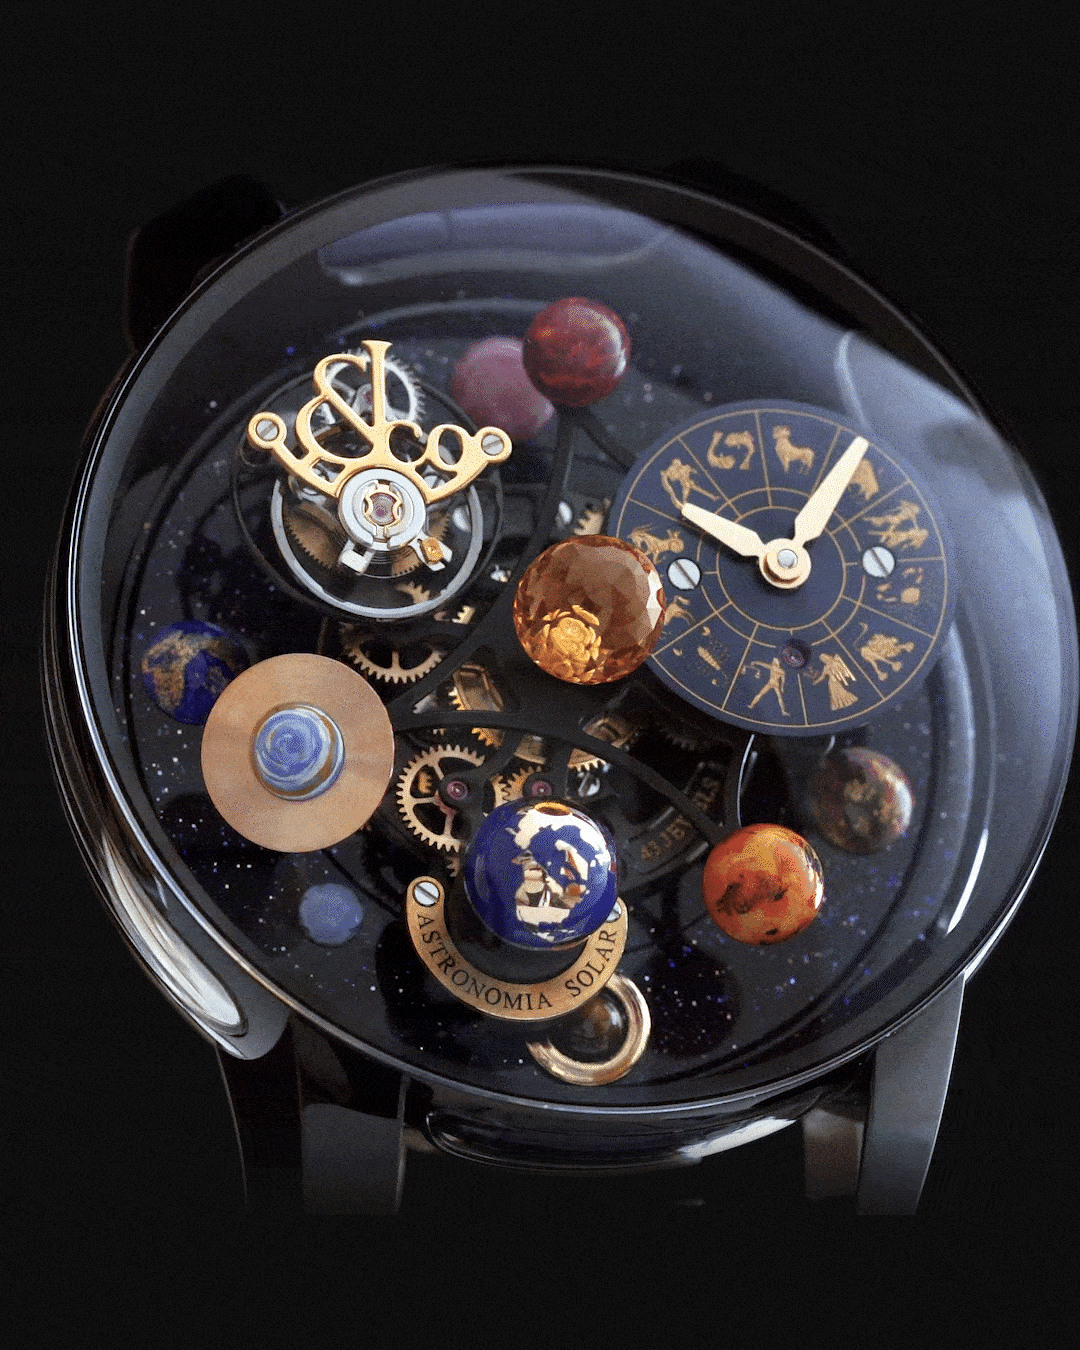 An excess of luxury, the Jacob & Co Astronomia Solar watch.